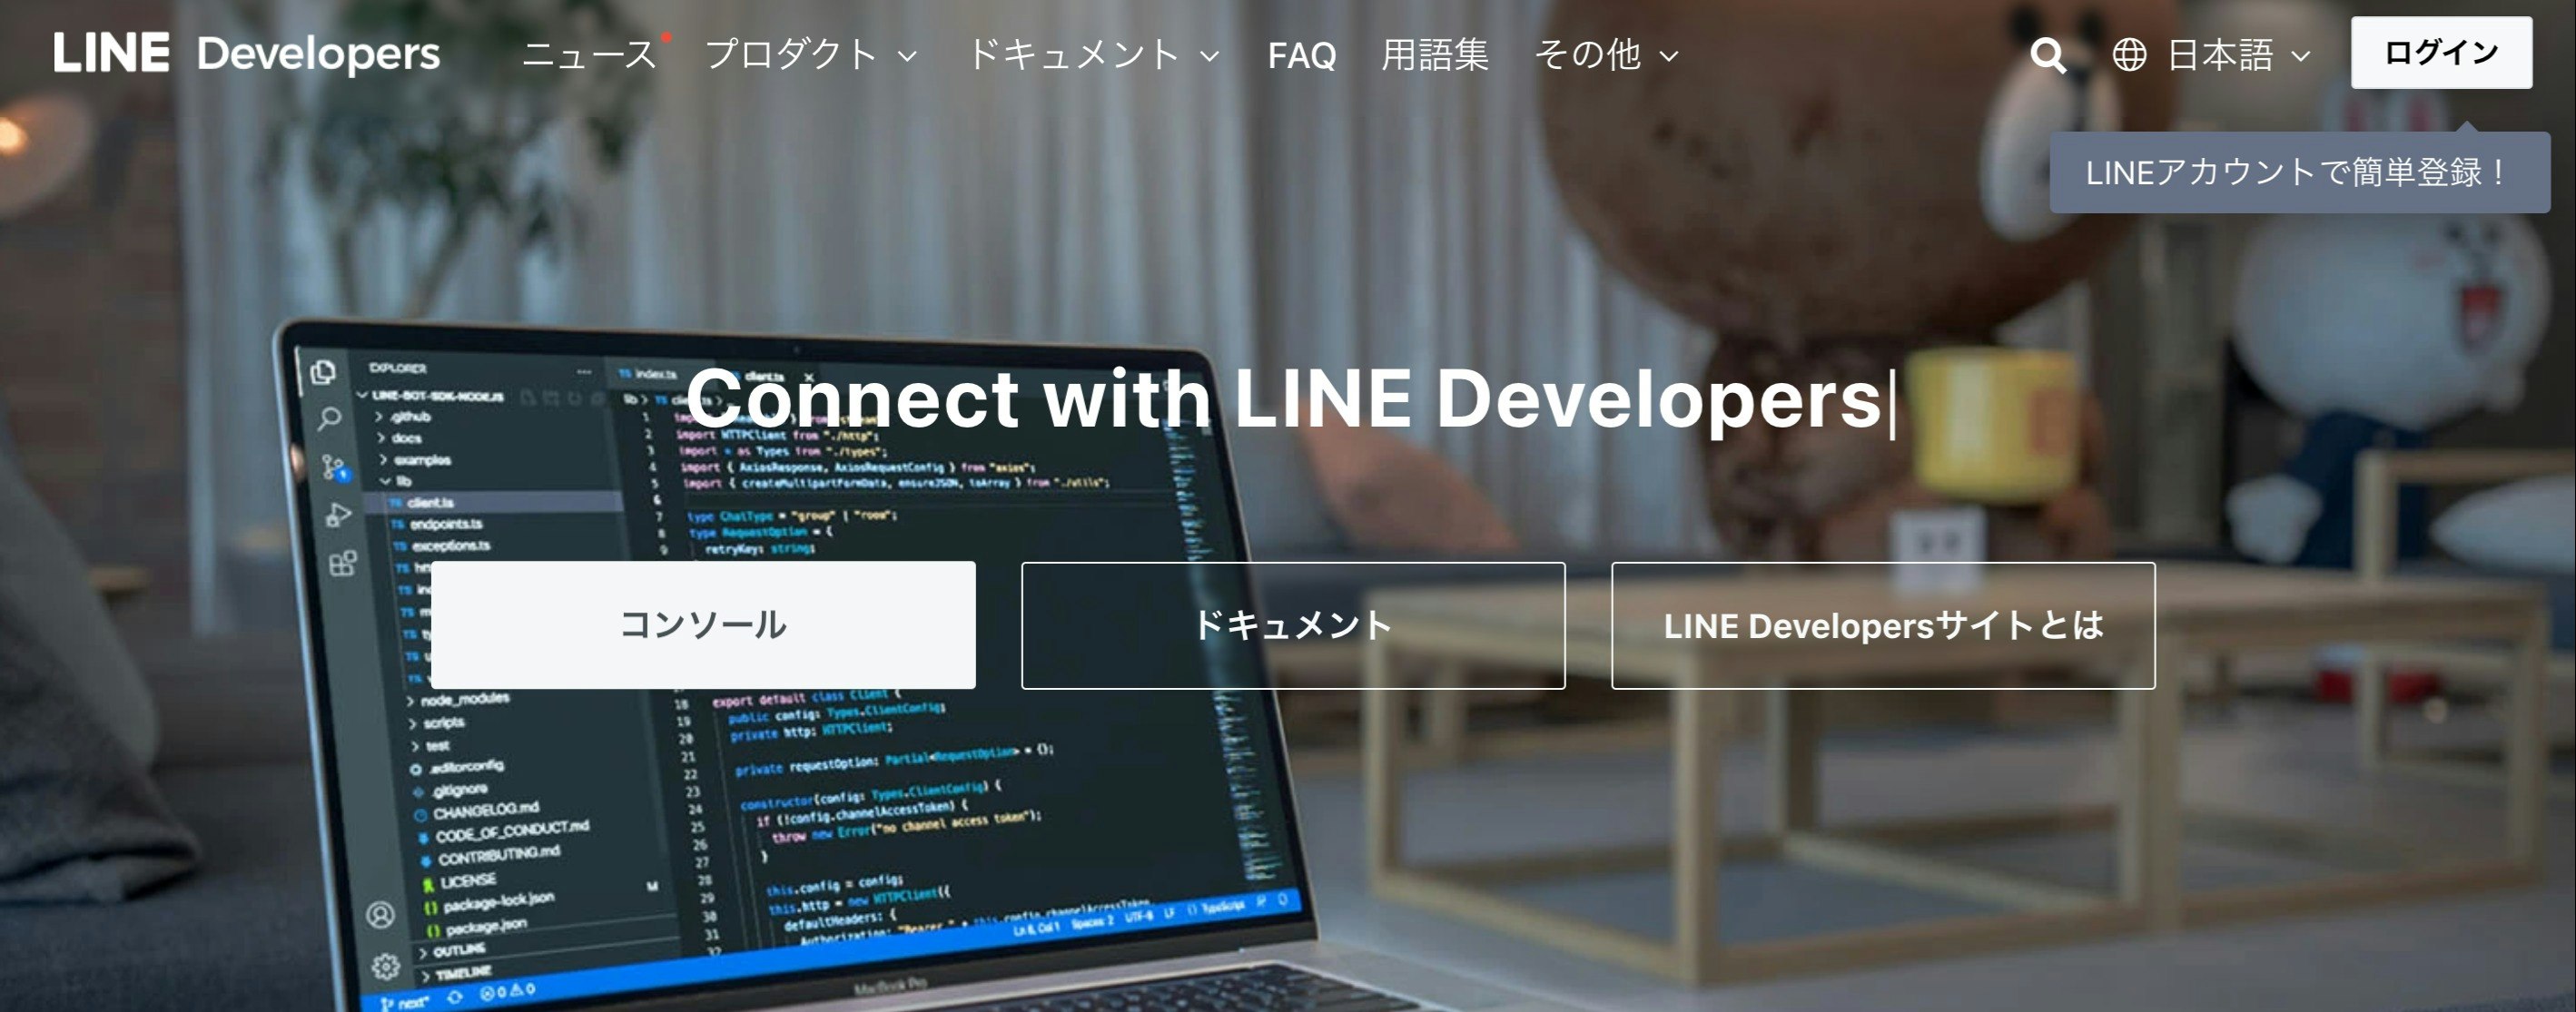 Connect with LINE Developers